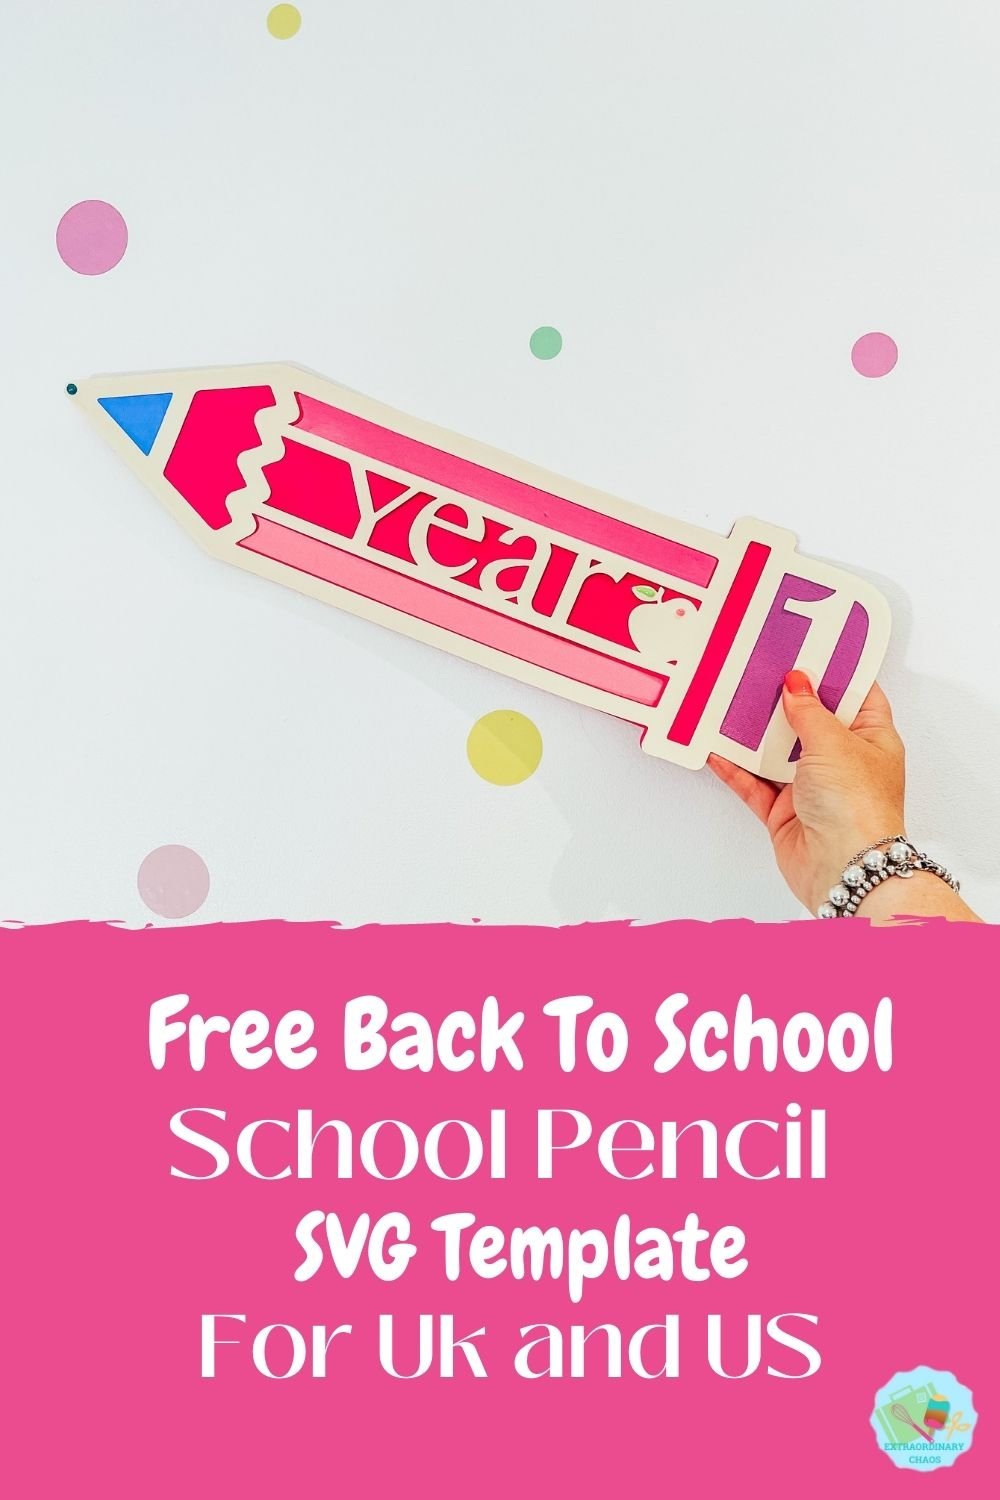 Free Back To School School Pencil SVG Template For Uk and US